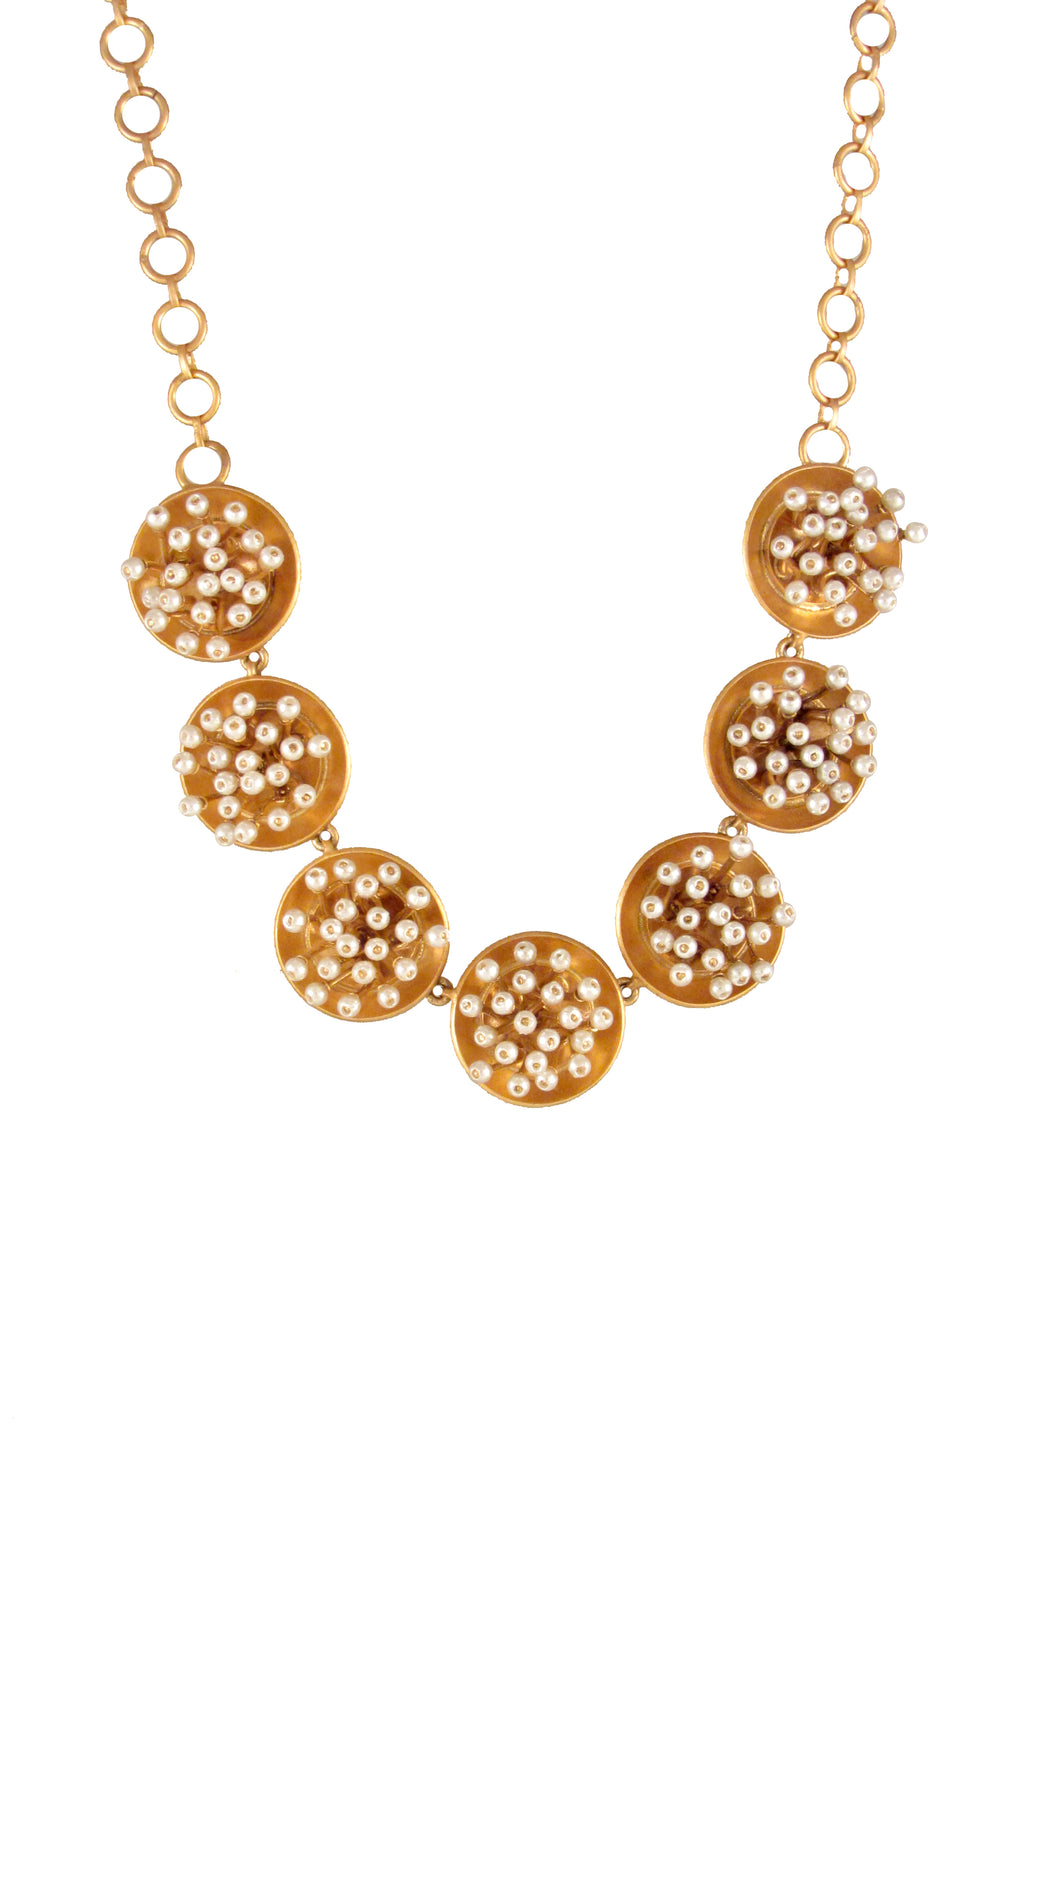 GOLD PLATED 7 WIRE PEARL COINS NECKPIECE